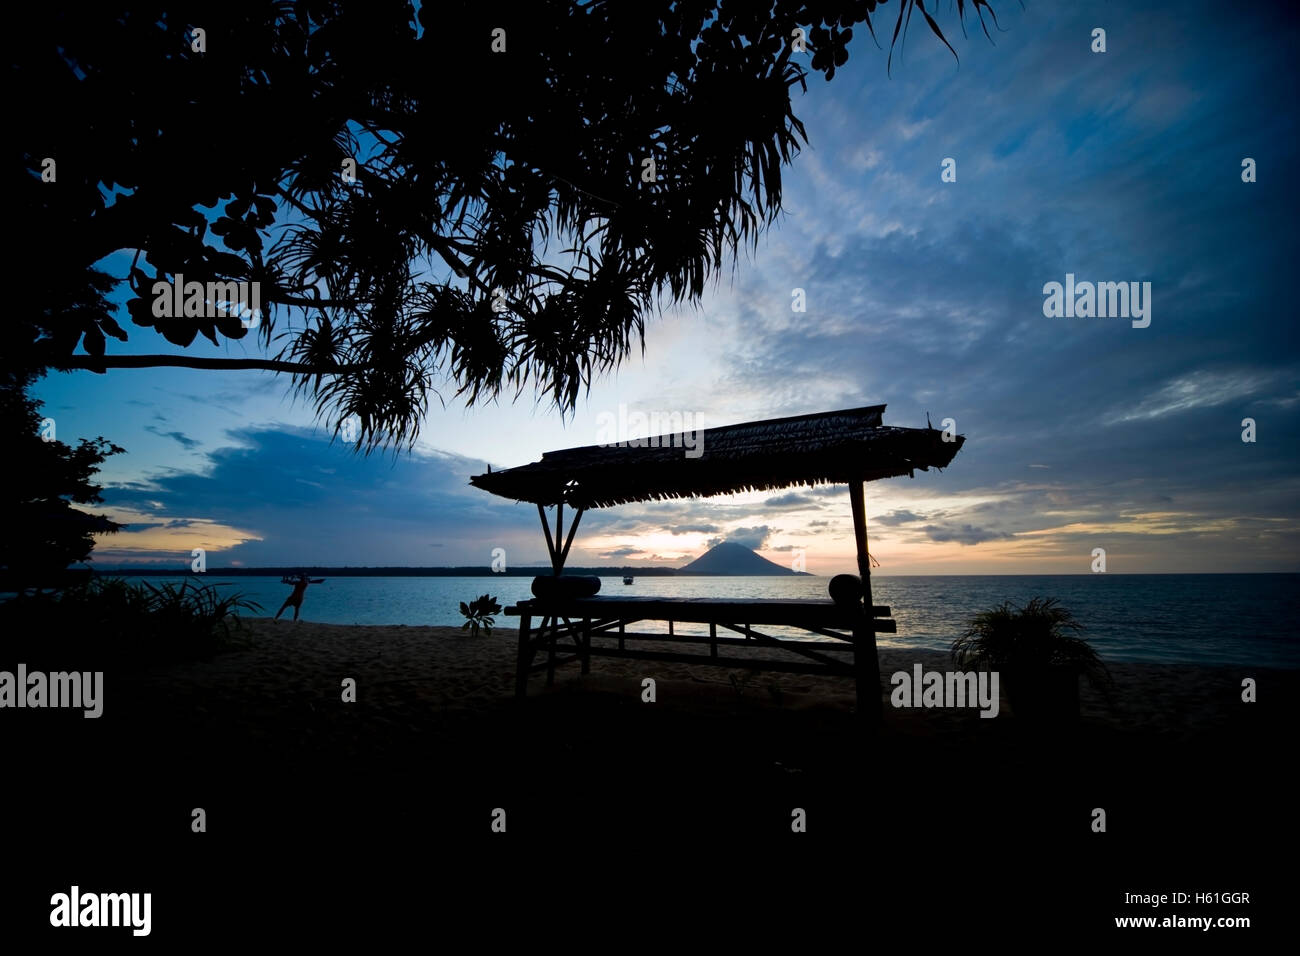 Silhouette of a sunbed, Siladen island, Sulawesi, Indonesia, Southeast Asia Stock Photo